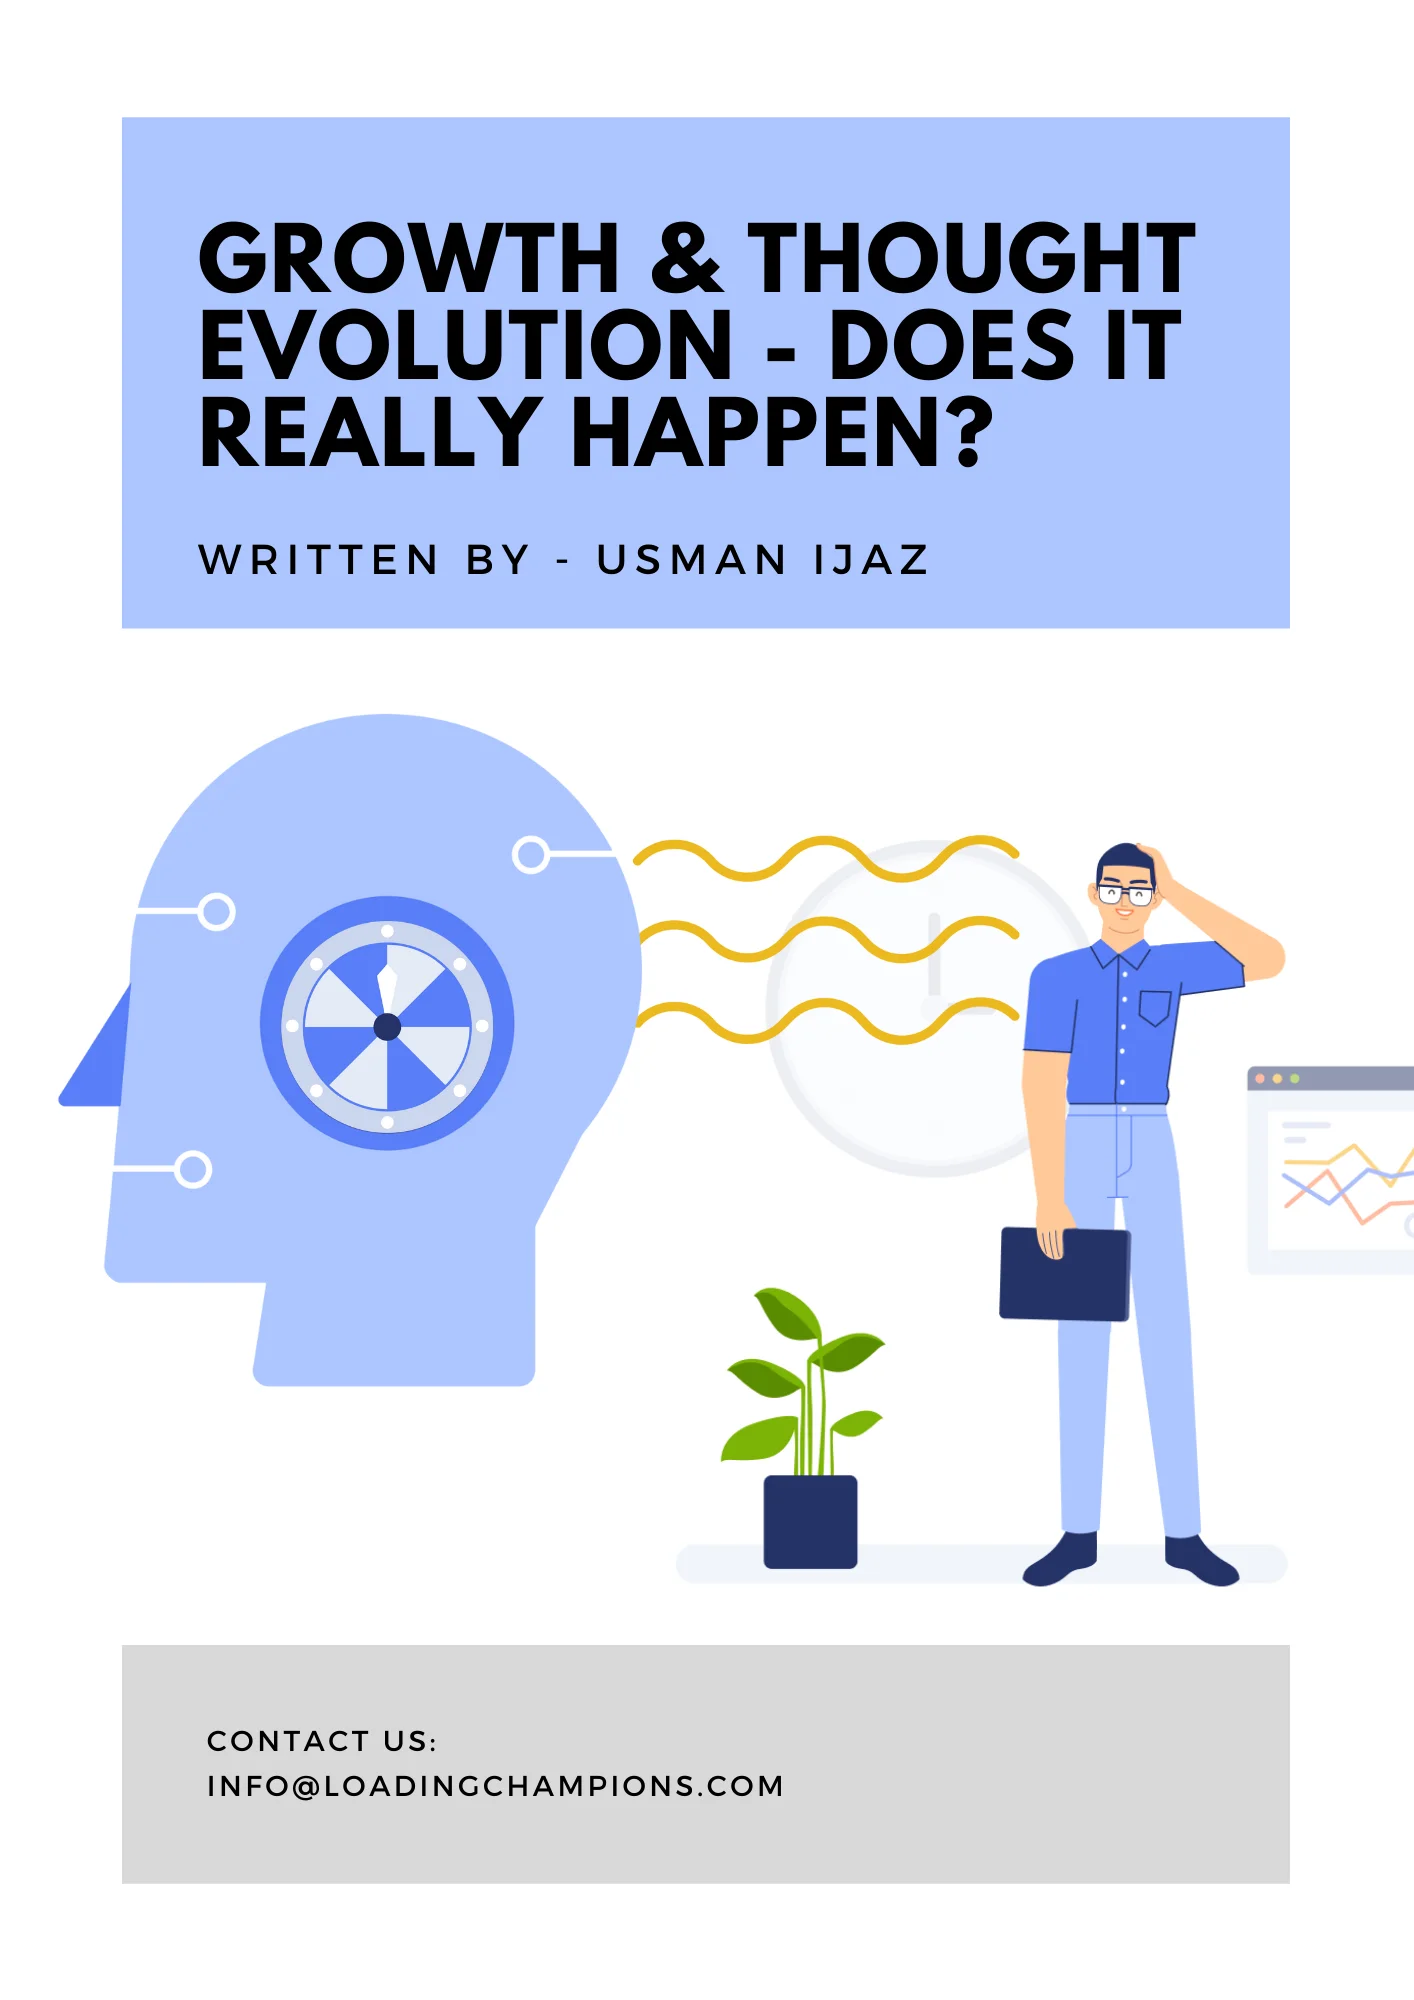 Growth & Thought Evolution - Does it really happen?